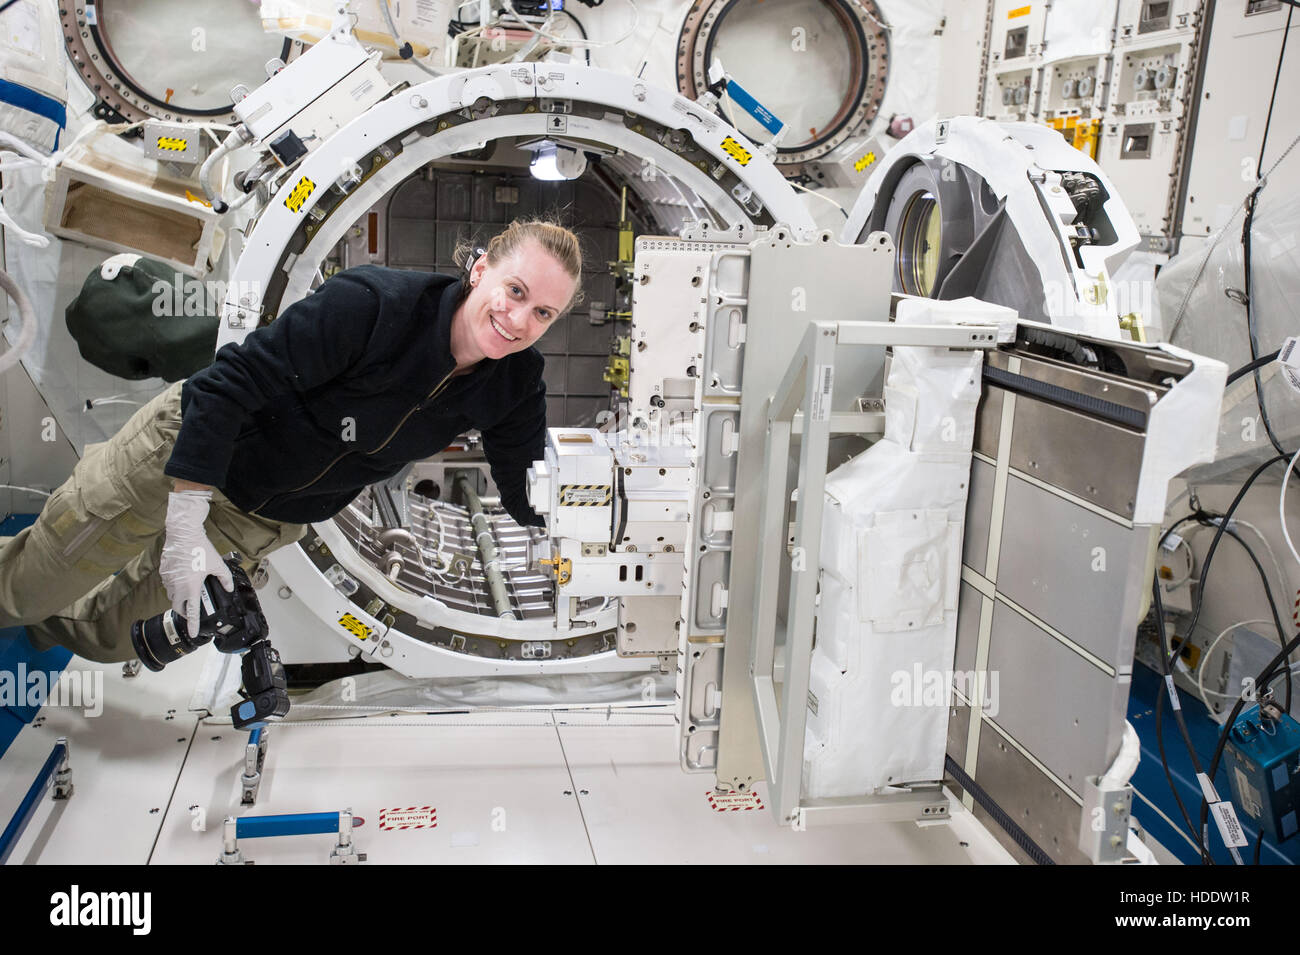 NASA International Space Station Expedition 49 crew member astronaut Kate Rubins works inside the Japanese Experiment Module Kibo September 27, 2016 while in Earth orbit. Stock Photo